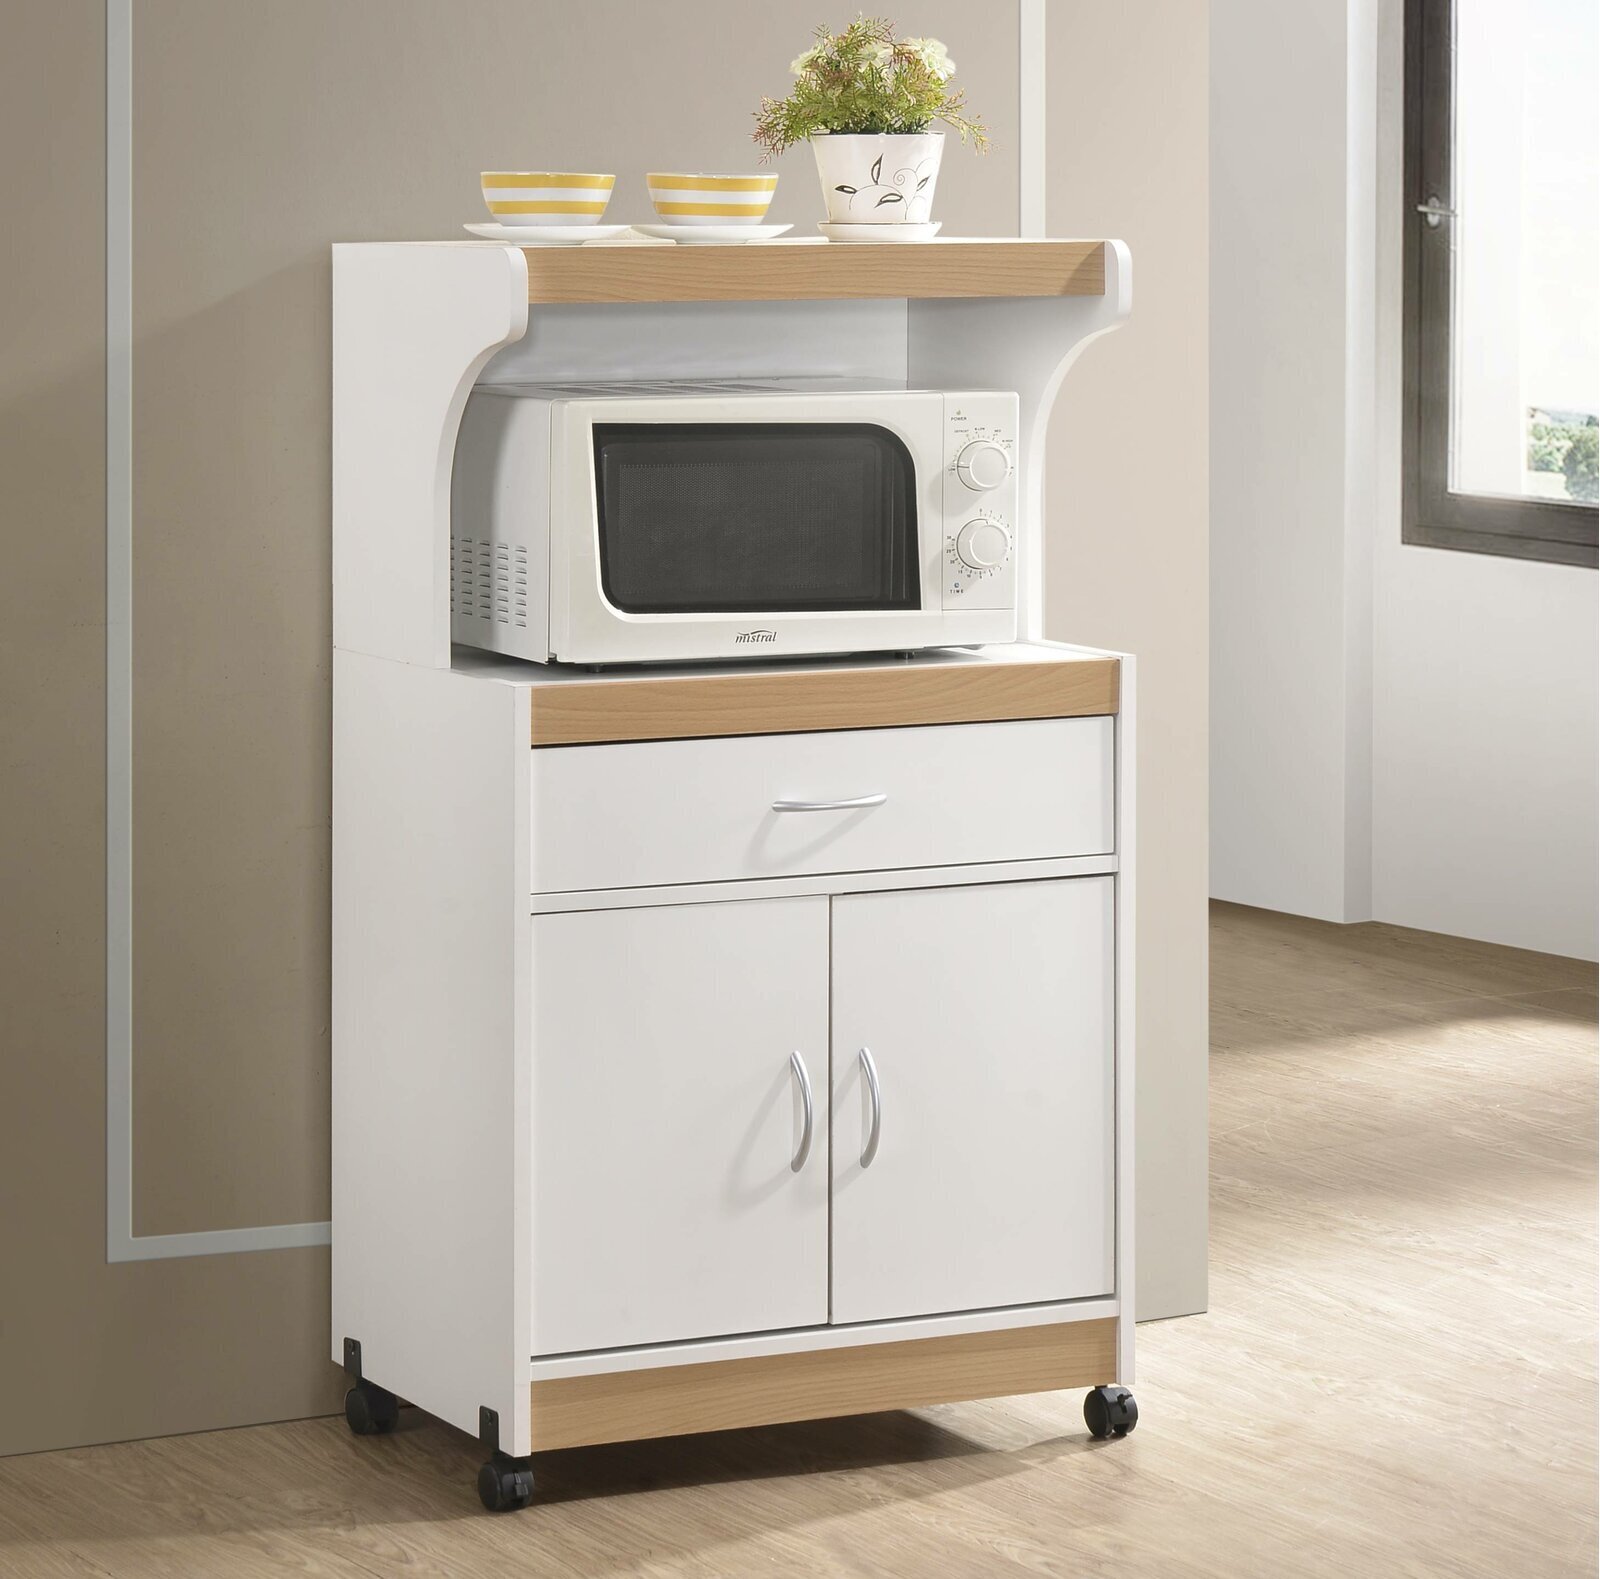 Portable kitchen unit with room for microwave